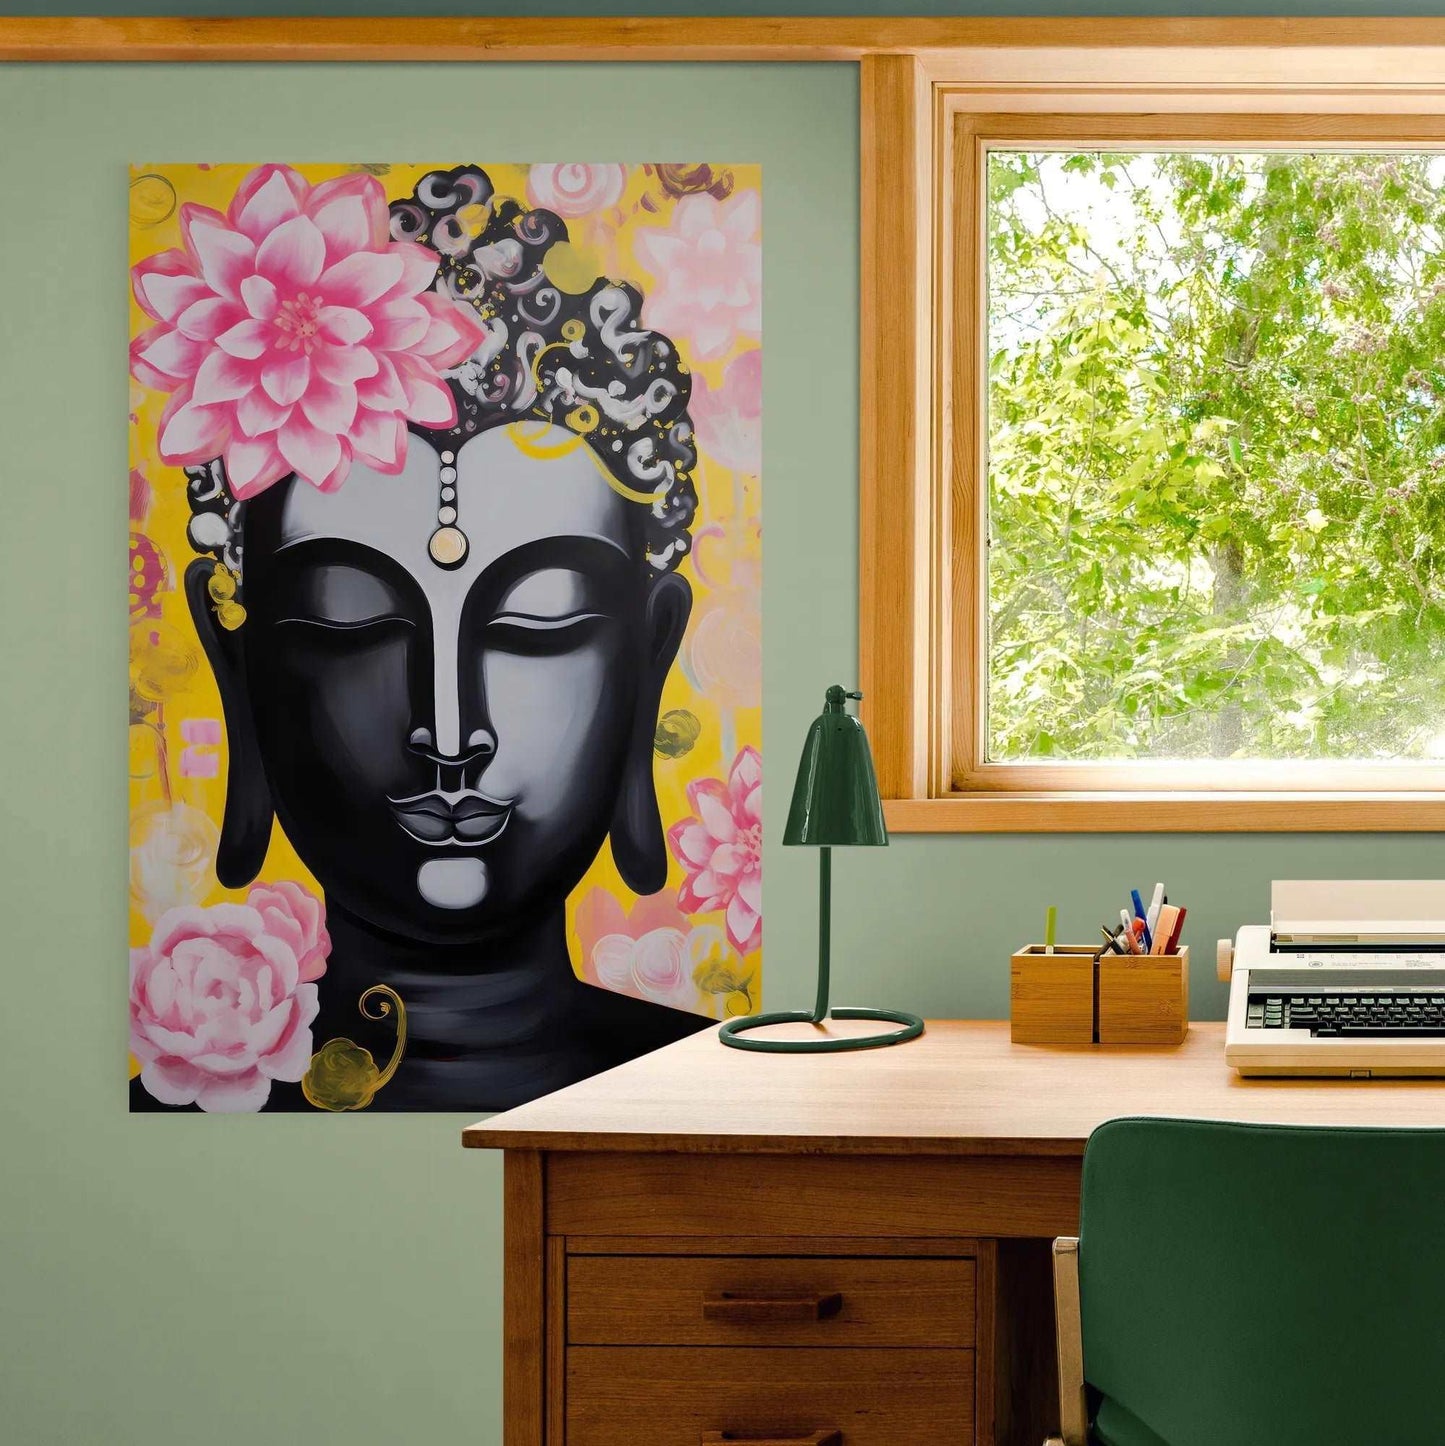 Home office setting with a Buddha painting adorned with pink flowers and a yellow backdrop, infusing the space with tranquility and color.